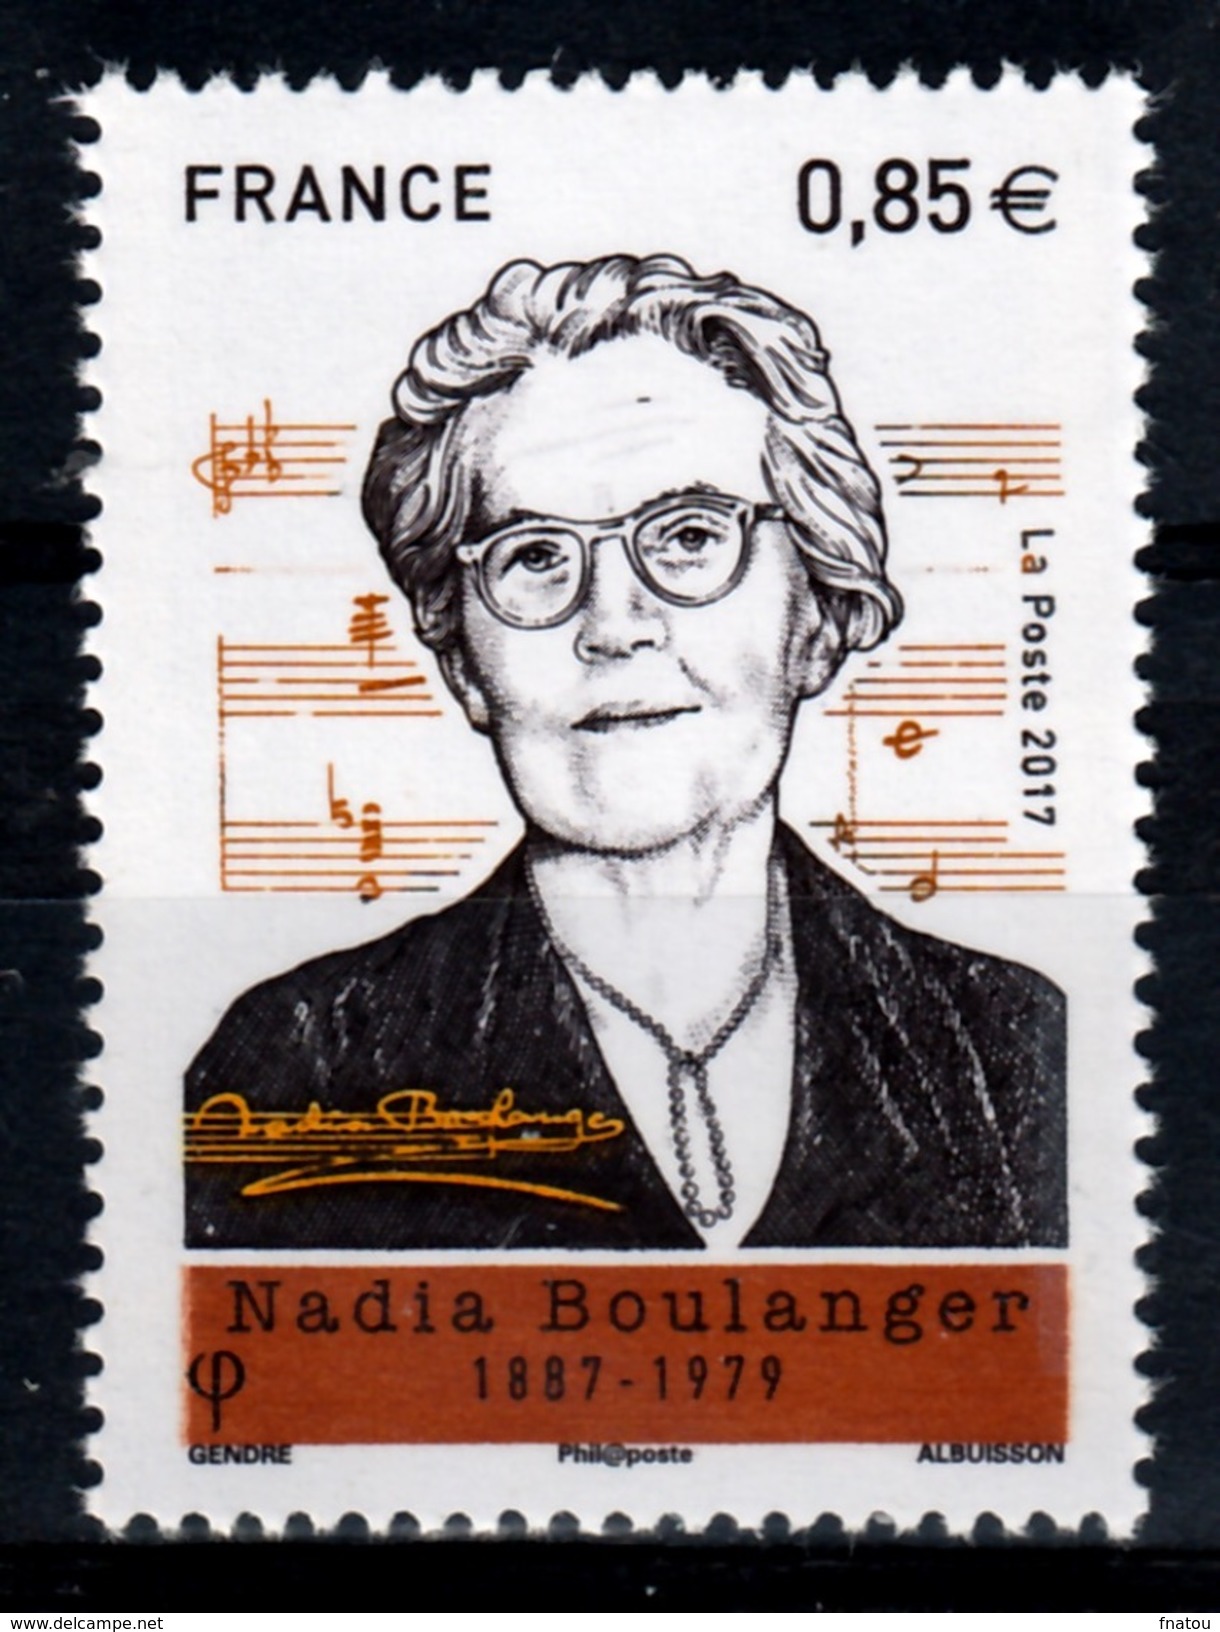 France, Nadia Boulanger, French Composer And Conductor, 2017, MNH VF - Unused Stamps